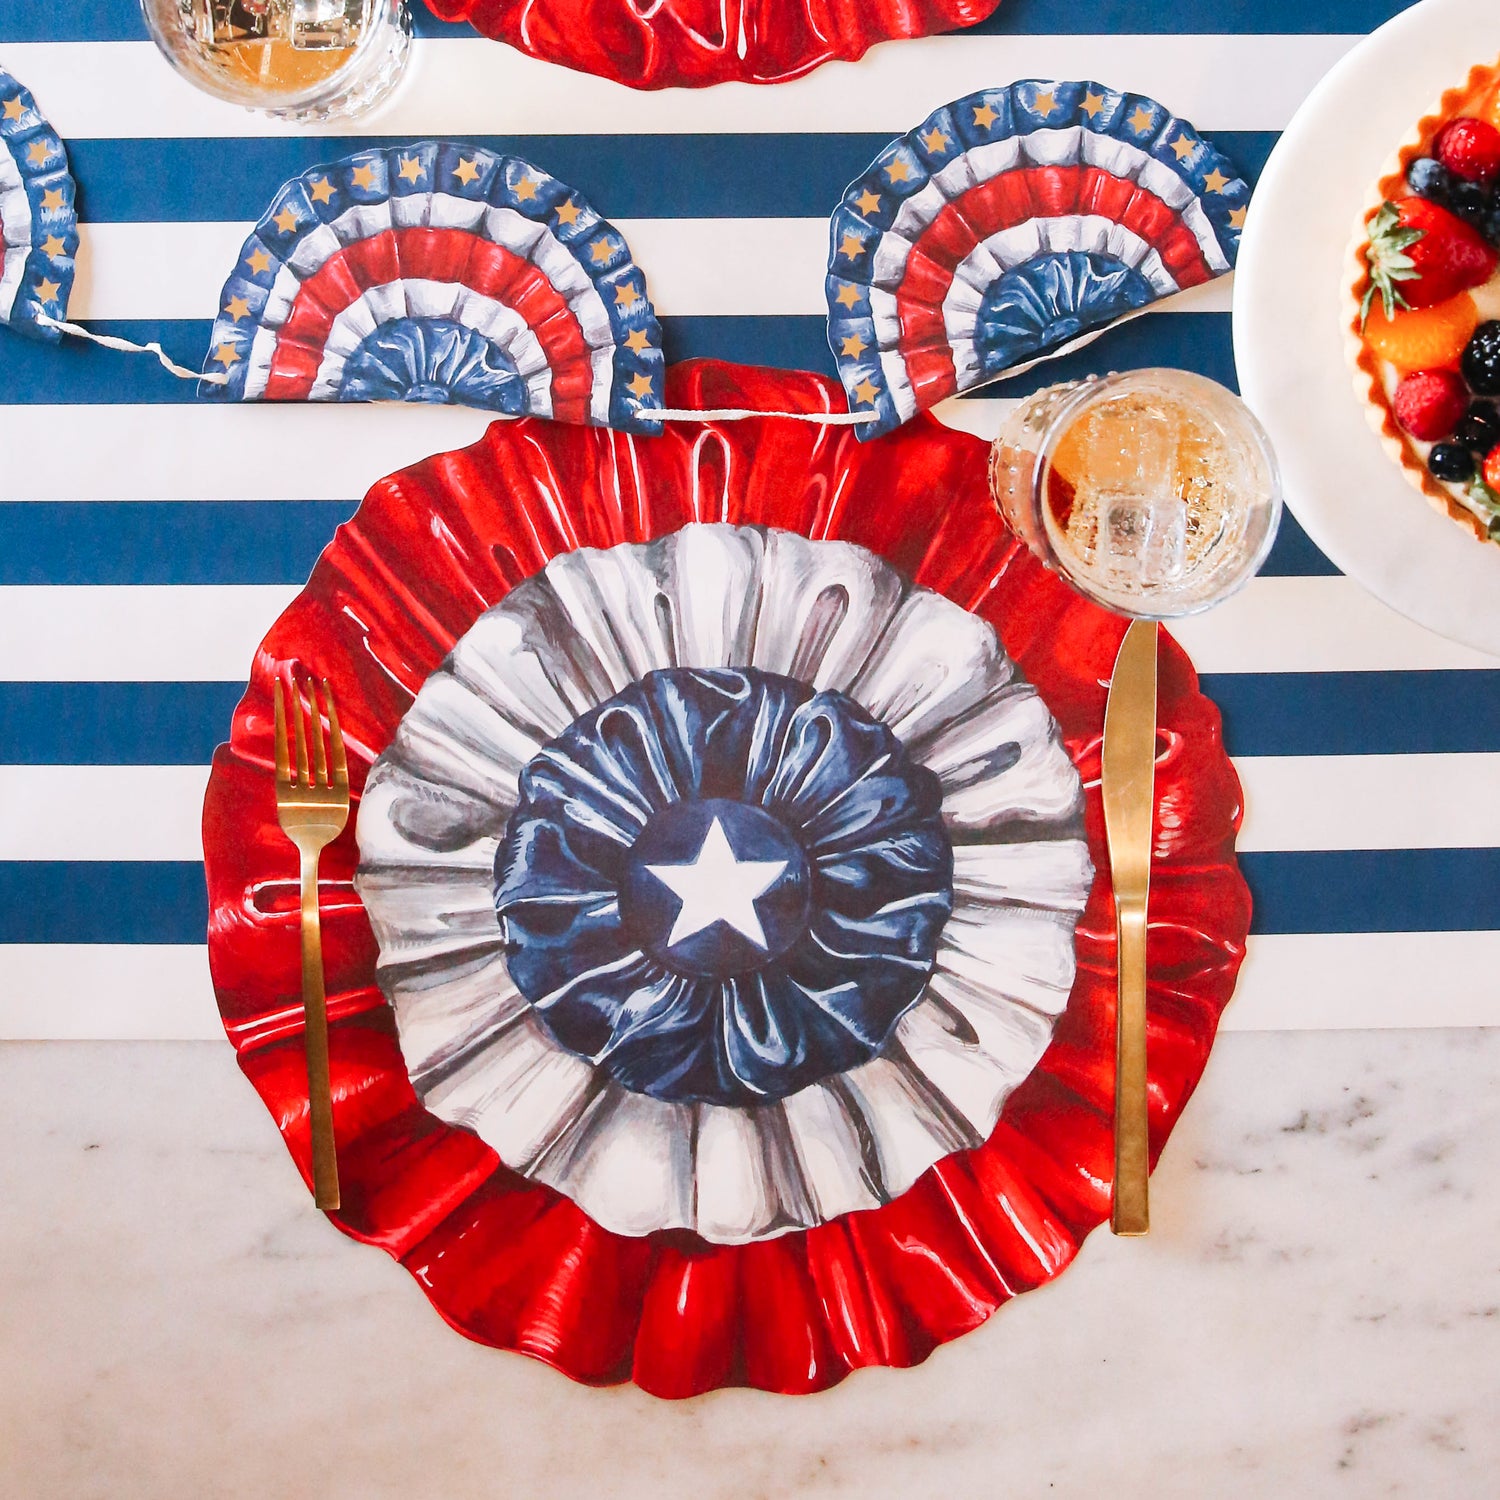 The Die-cut Star-Spangled Placemat on a patriotic table setting sans plate, showing the full design.